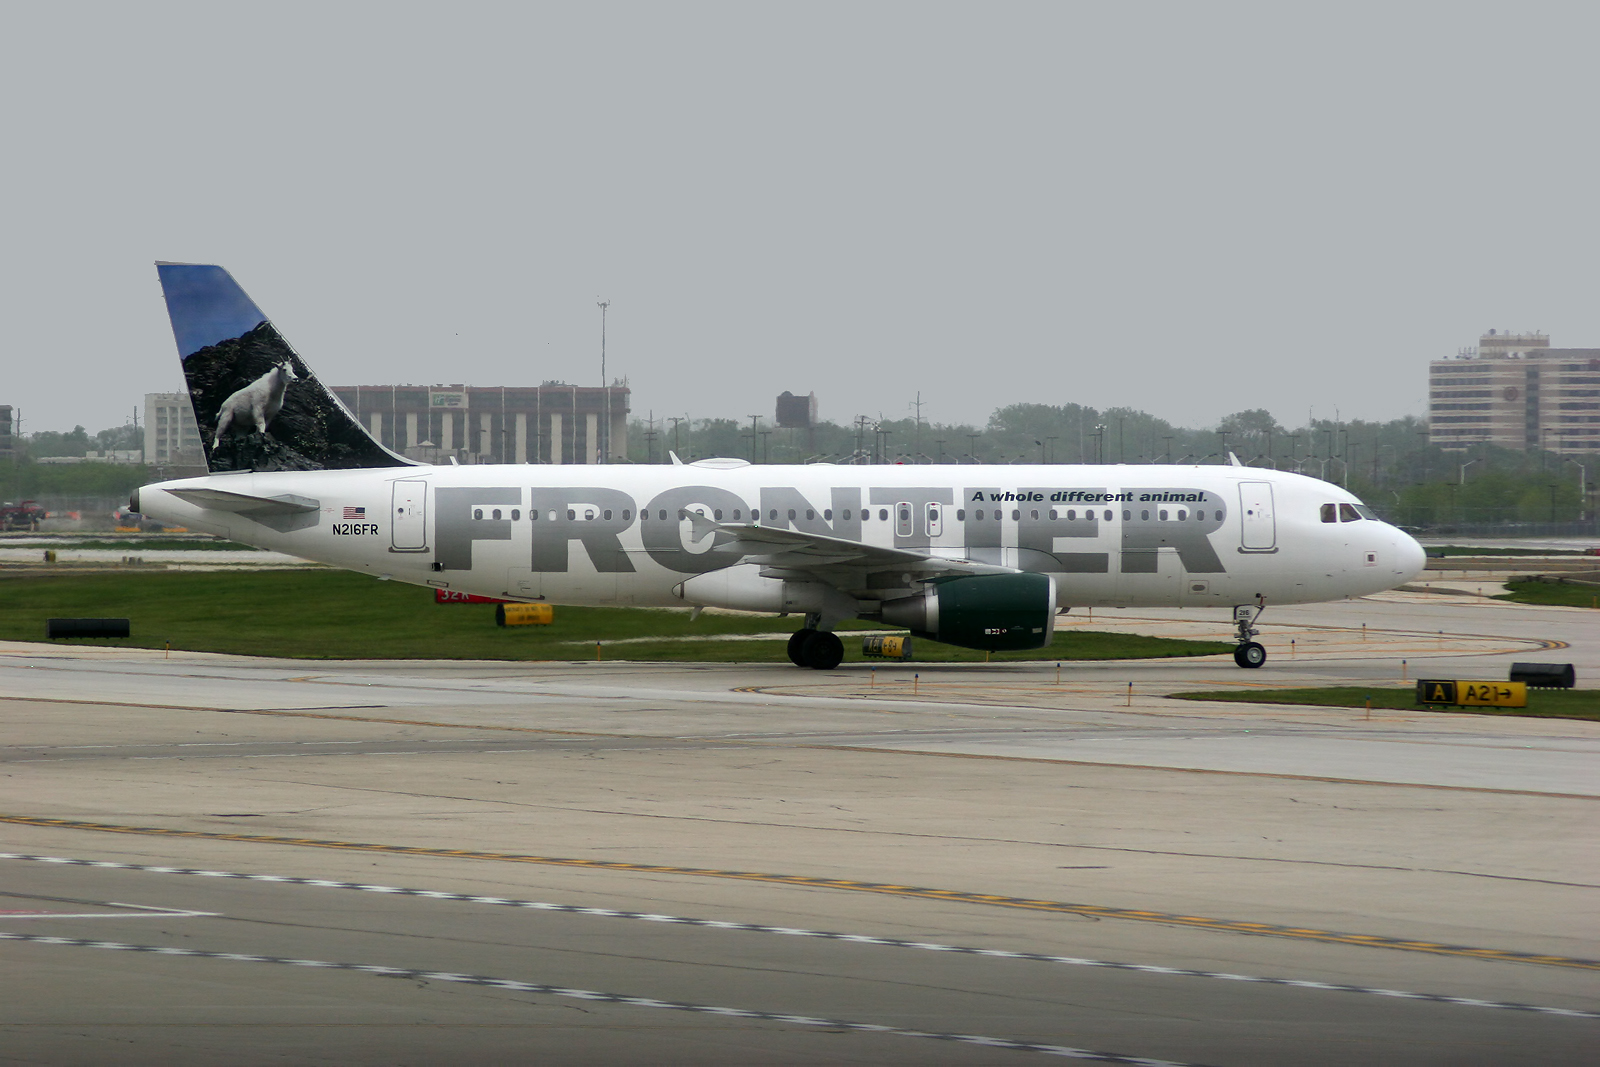 Frontier Now Has 10 New Routes From $39 One Way